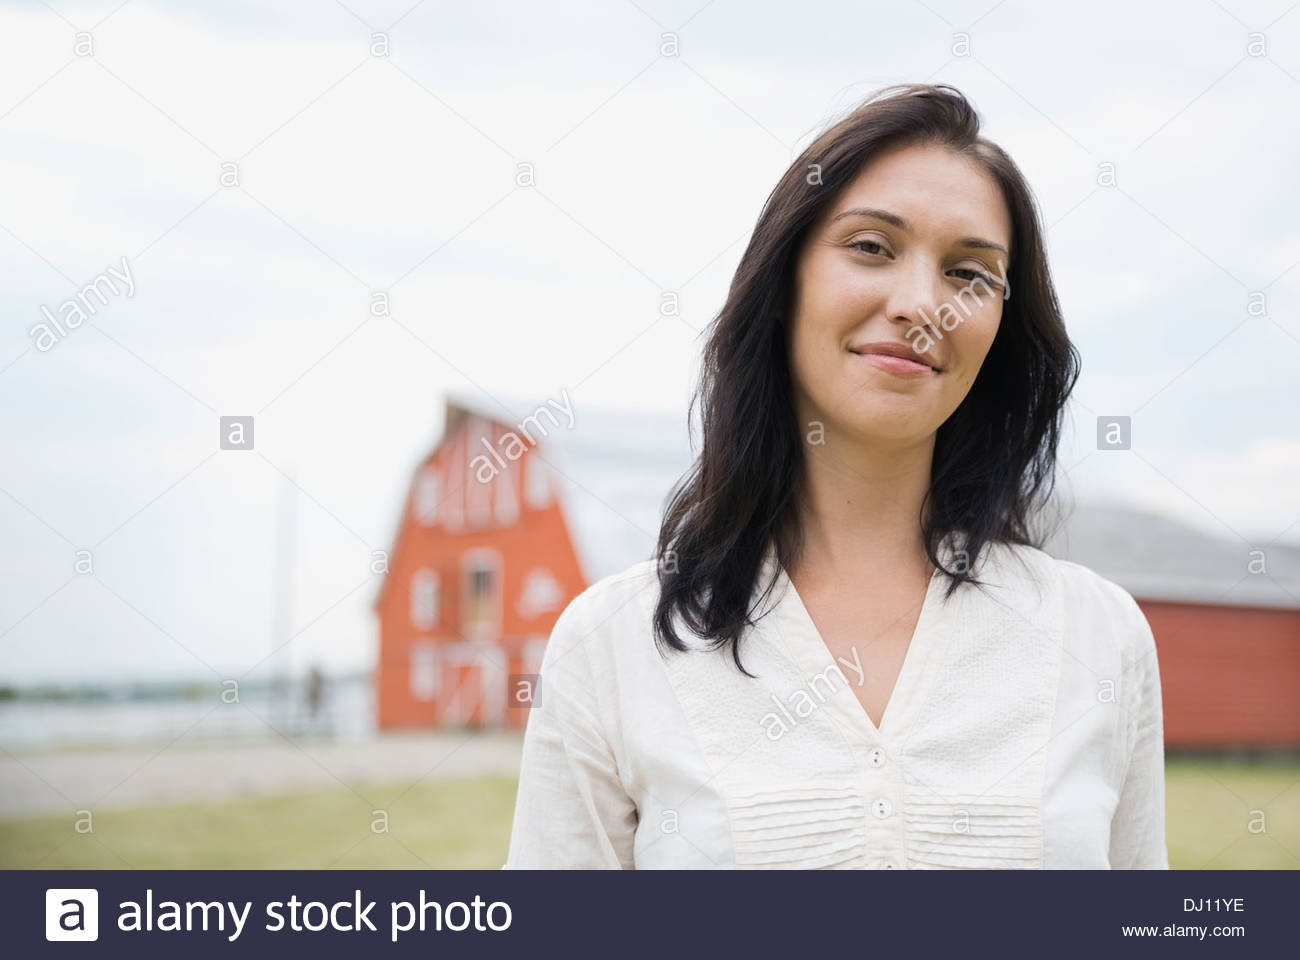 Portrait of confident woman standing outdoors Stock Photo